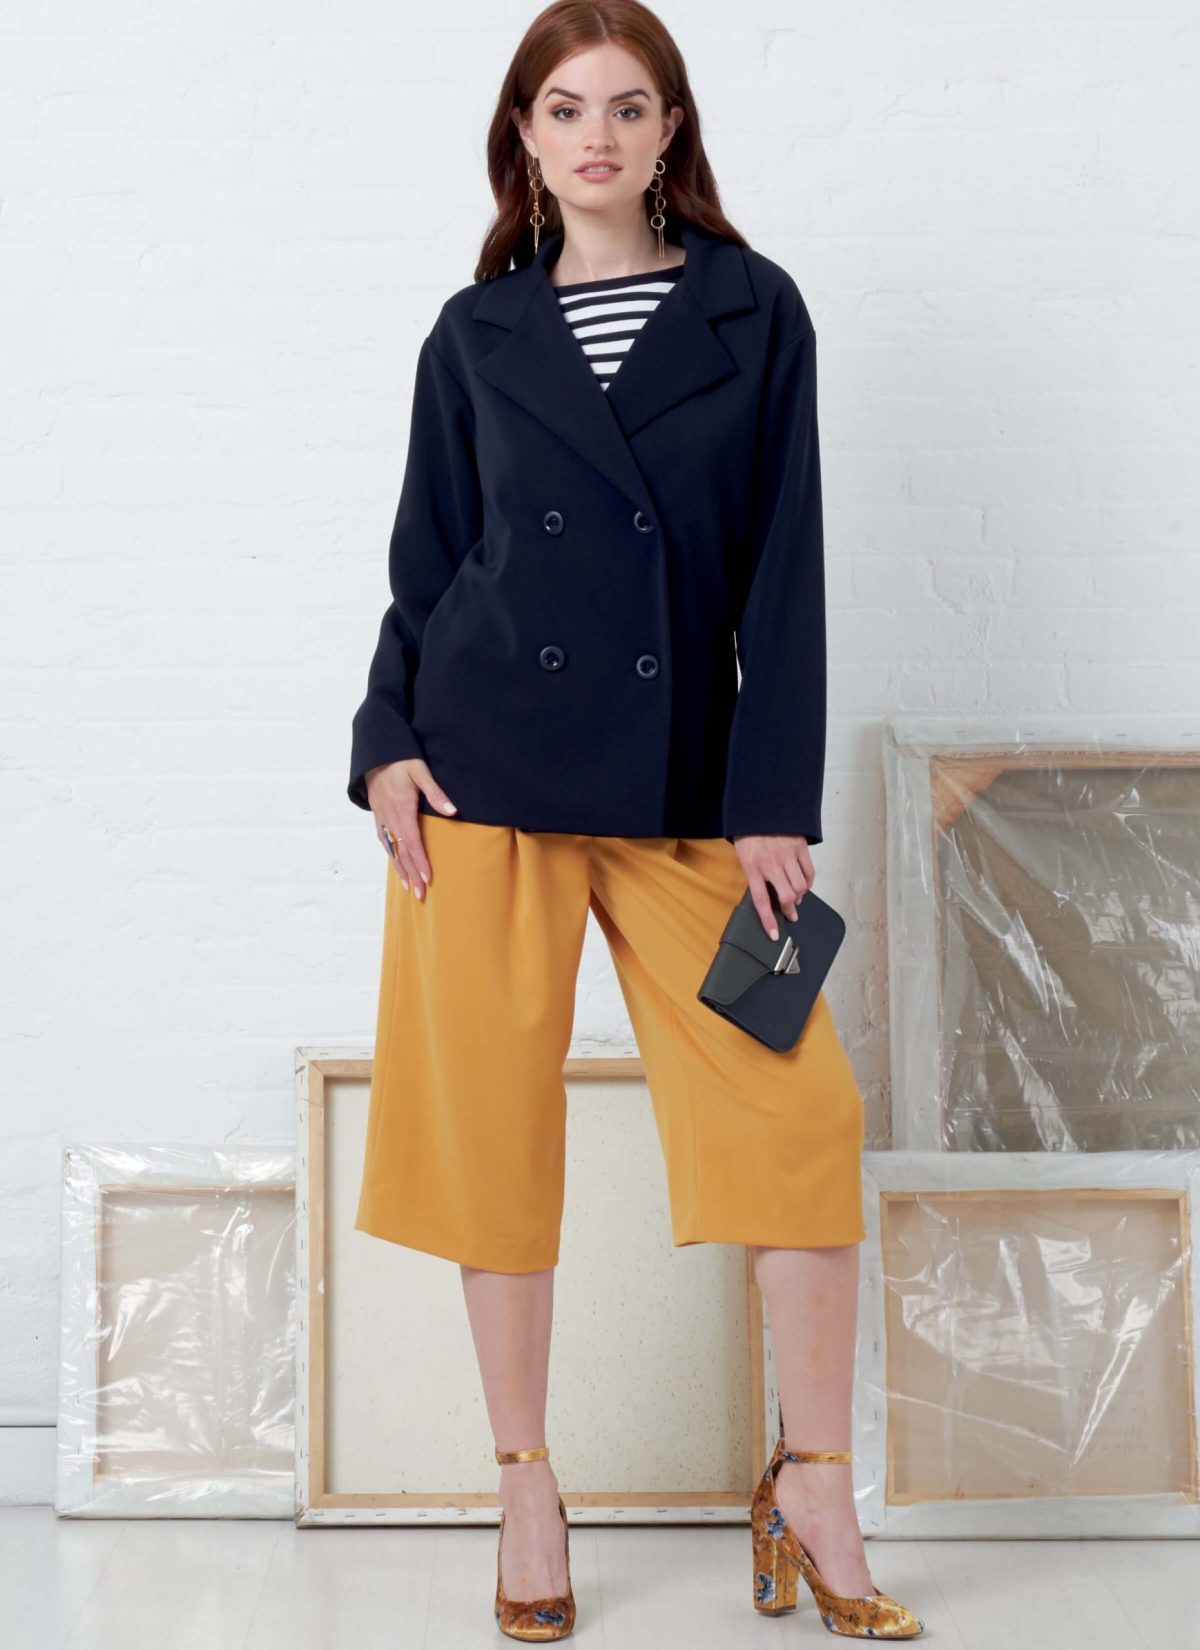 McCall's Sewing Pattern M7876 Misses' Jackets and Trousers